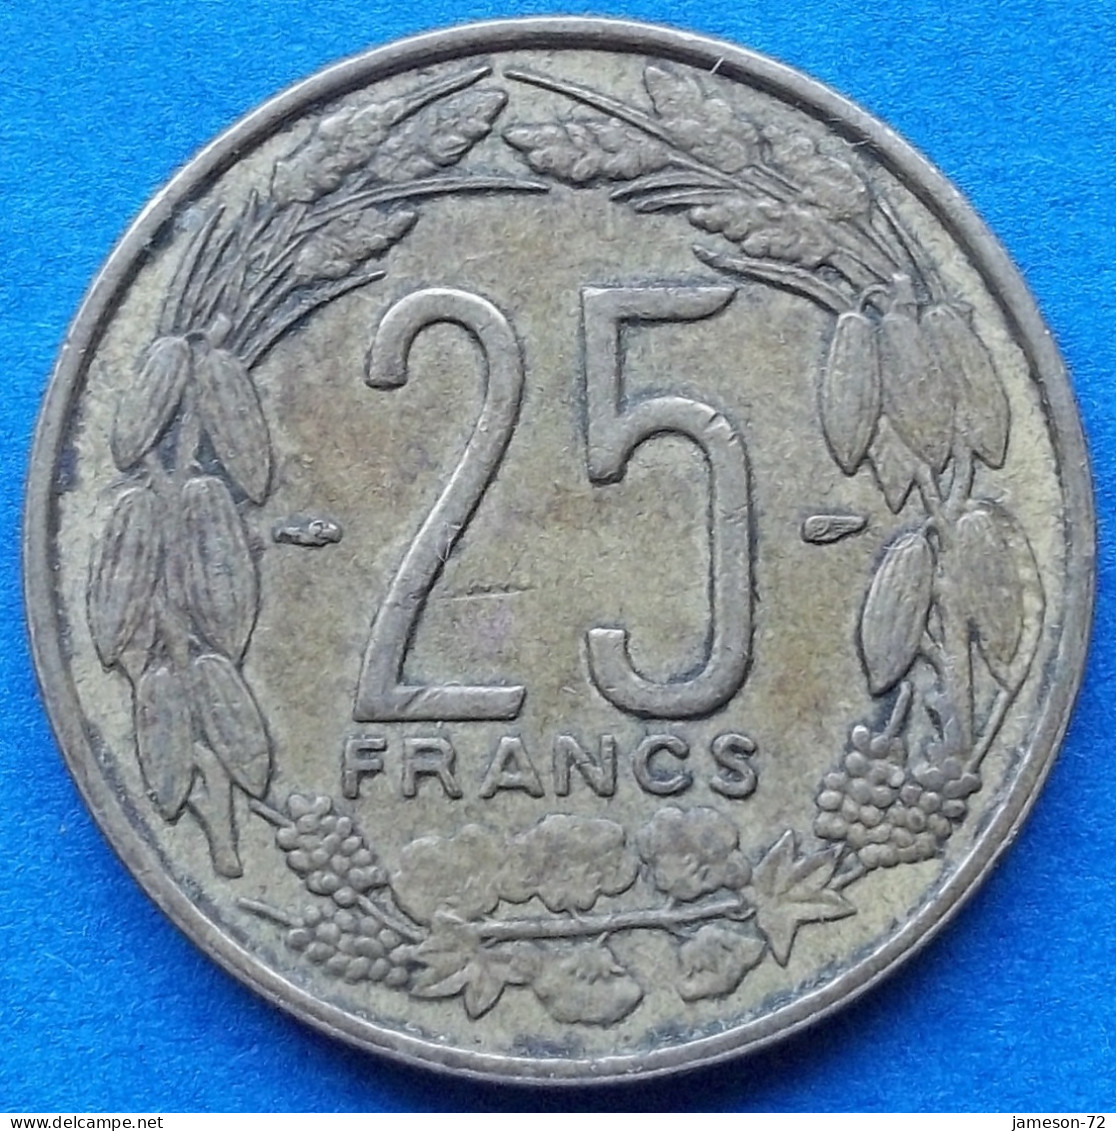 CAMEROON - 25 Francs 1958 "Three Giant Eland" KM# 12 French Equatorial Africa - Edelweiss Coins - Camerun